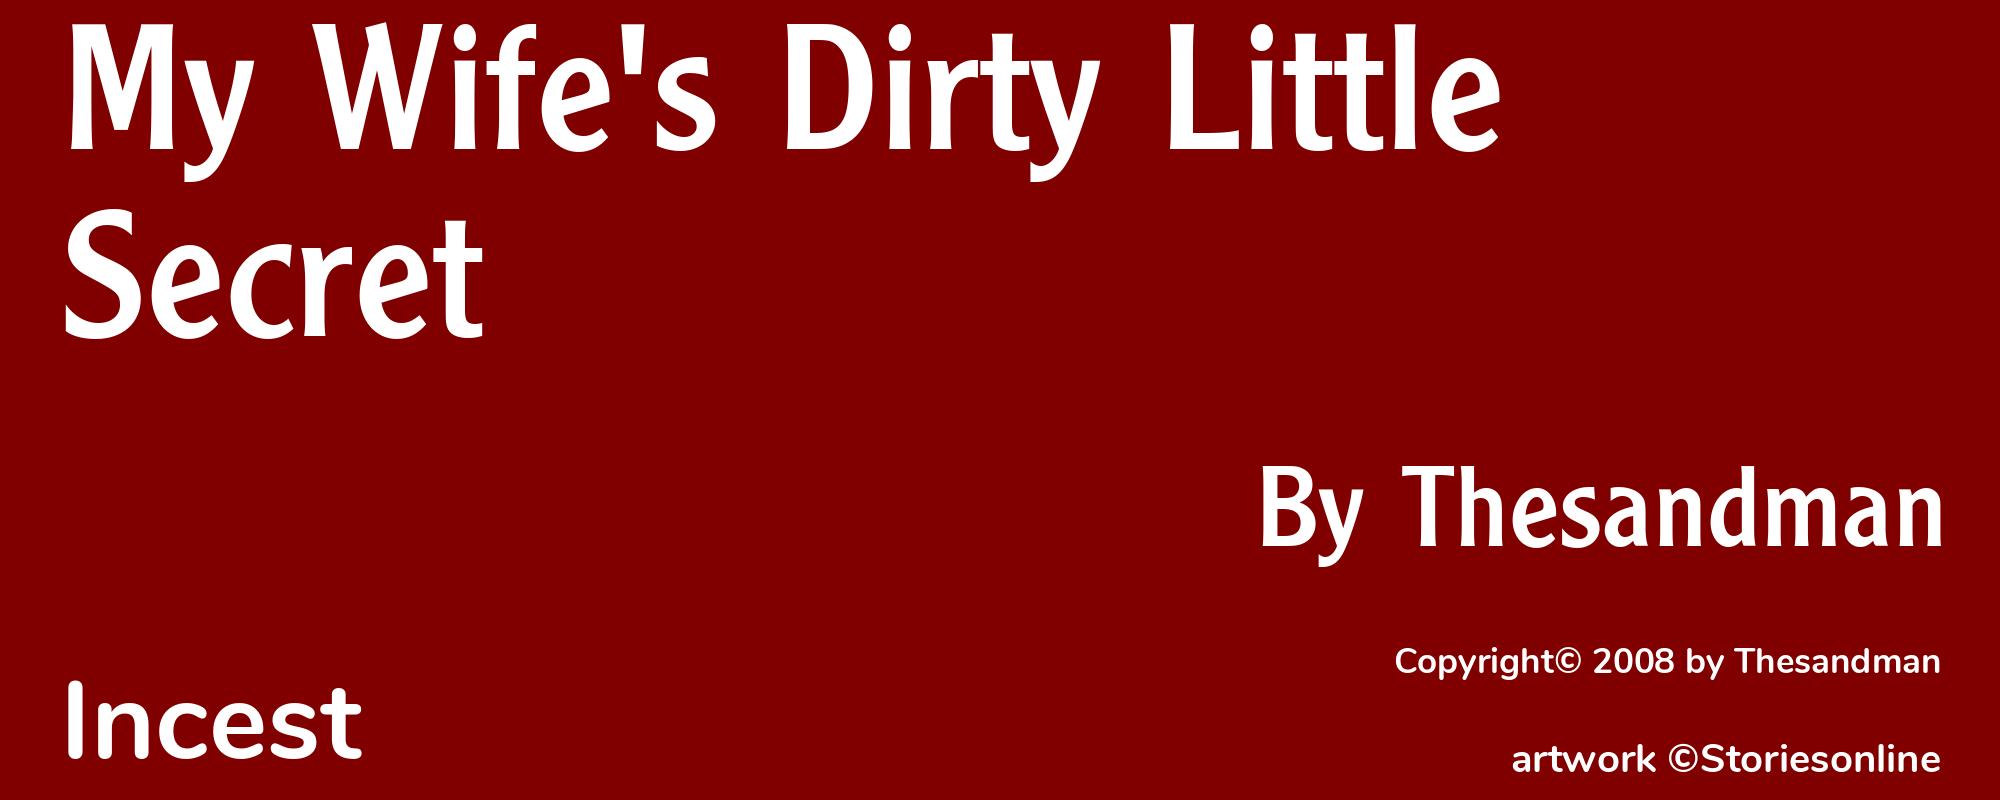 My Wife's Dirty Little Secret - Cover